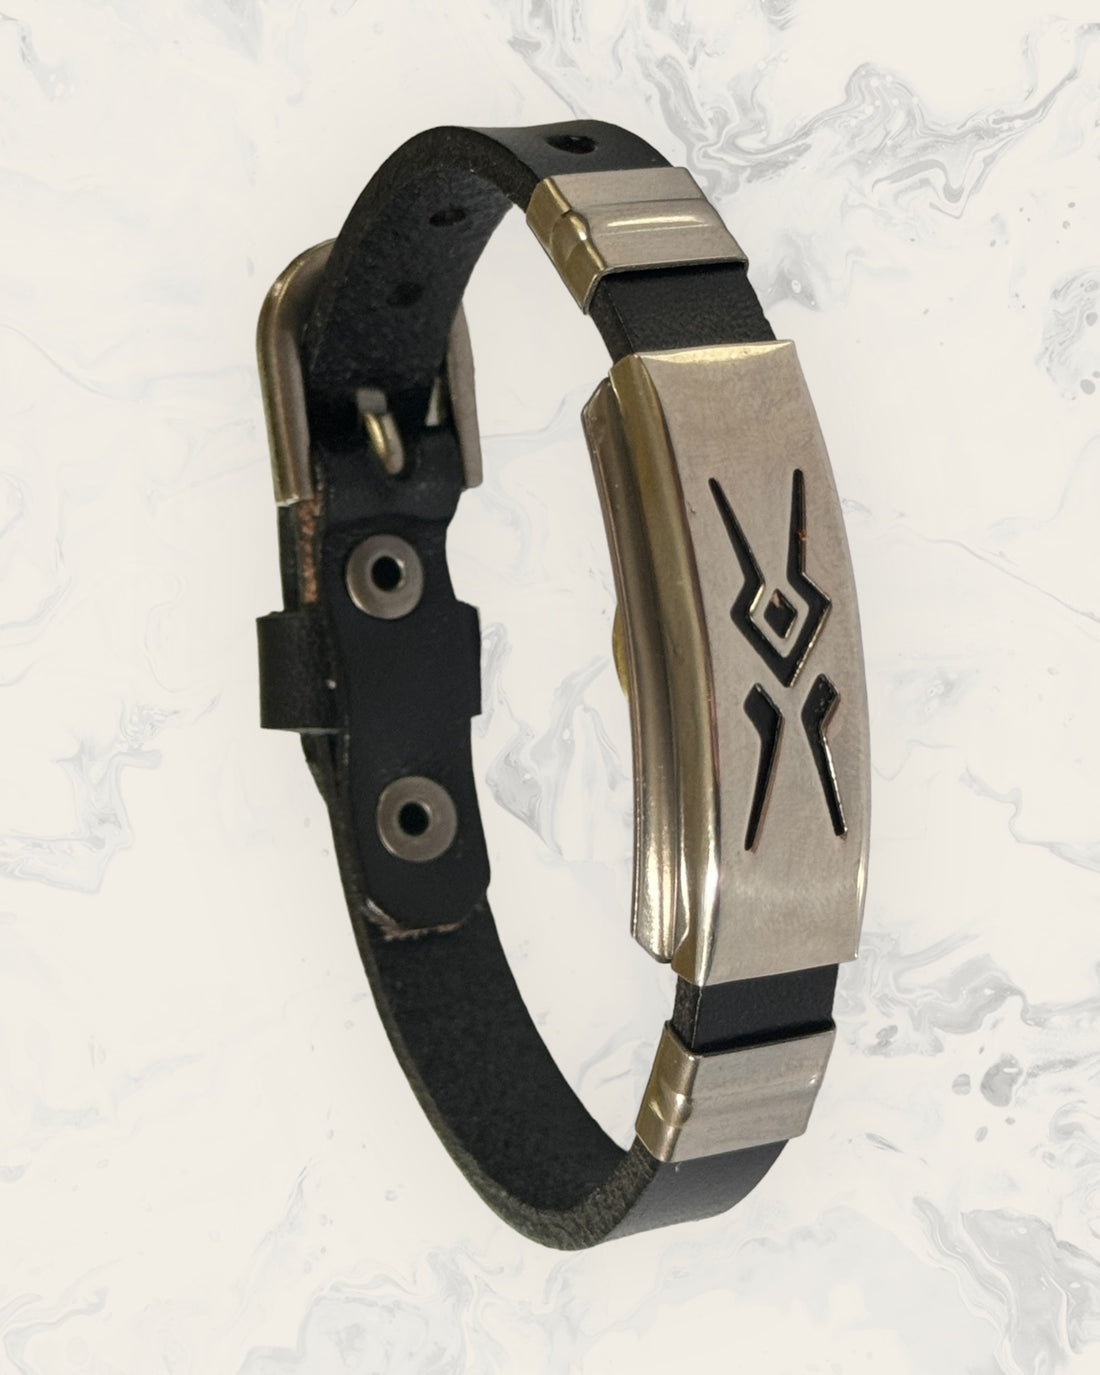 Natural Pain Relief and EMF Protection Bracelet Leather Band Color Black with Aztec design on a silver metal slider